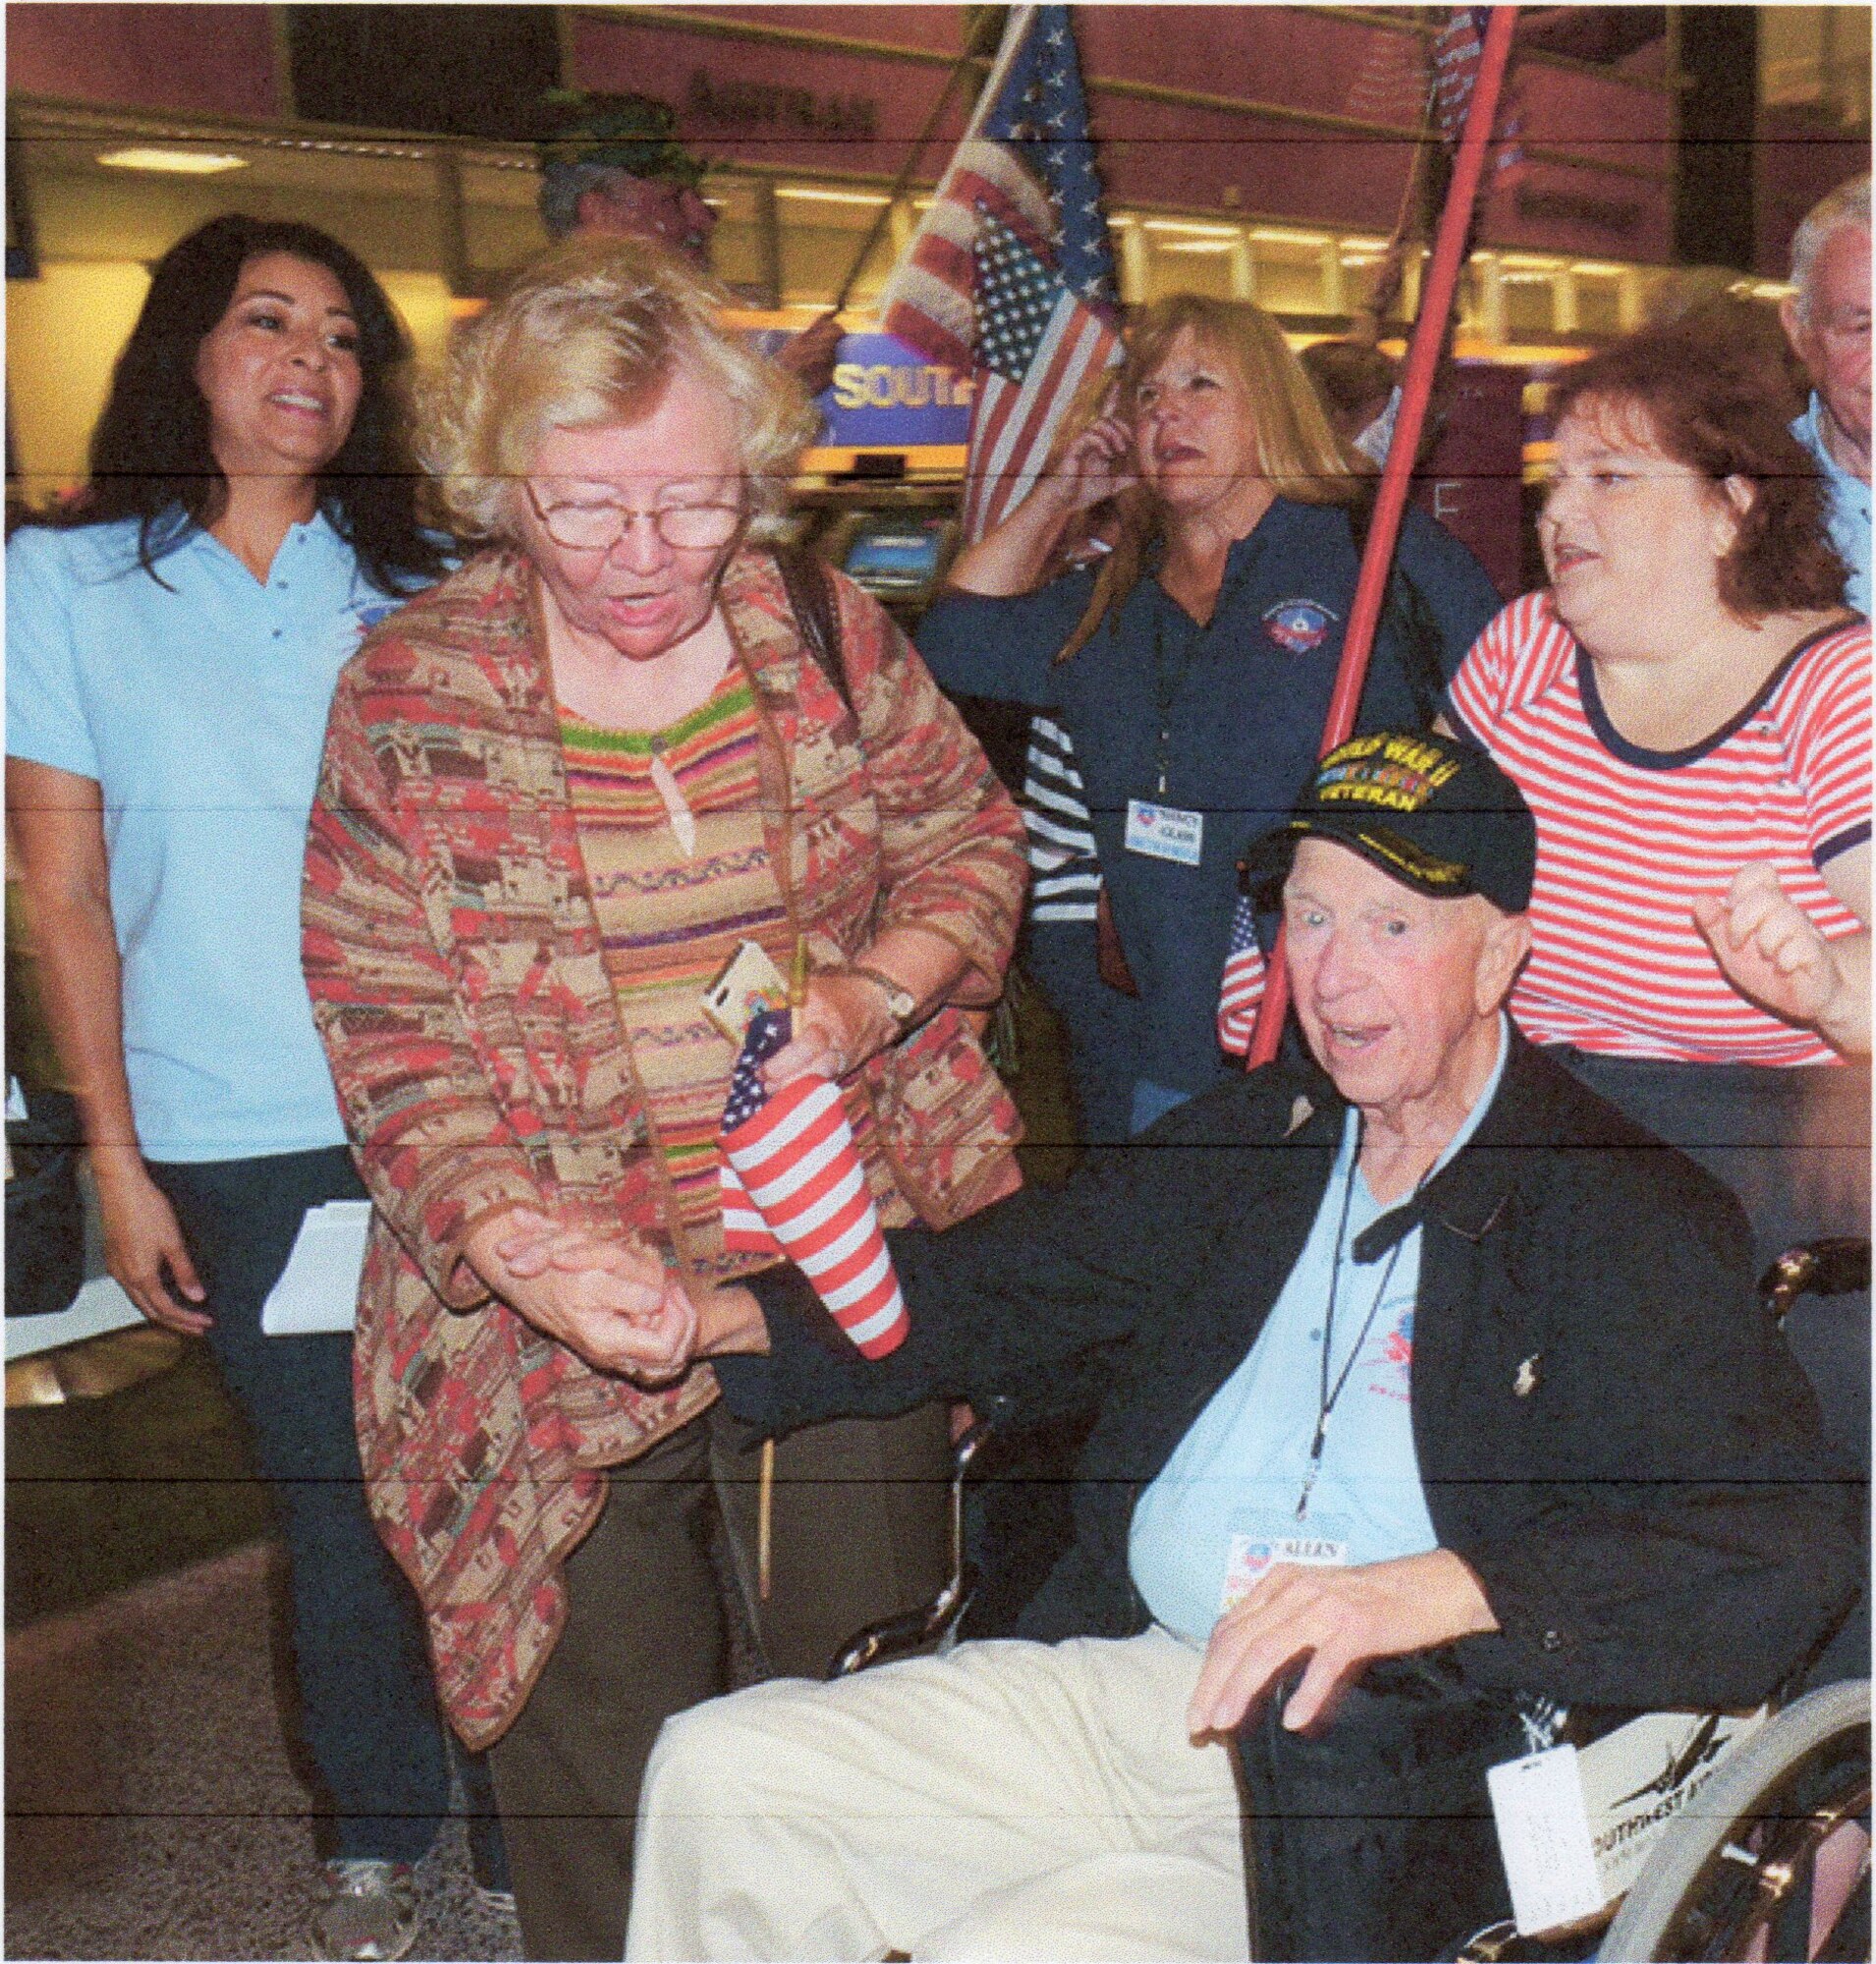 Allen Larsen arrives home at Austin Bergstrom International Airport, November 2, 2013, welcomed by his wife Margaret and other well-wishers.